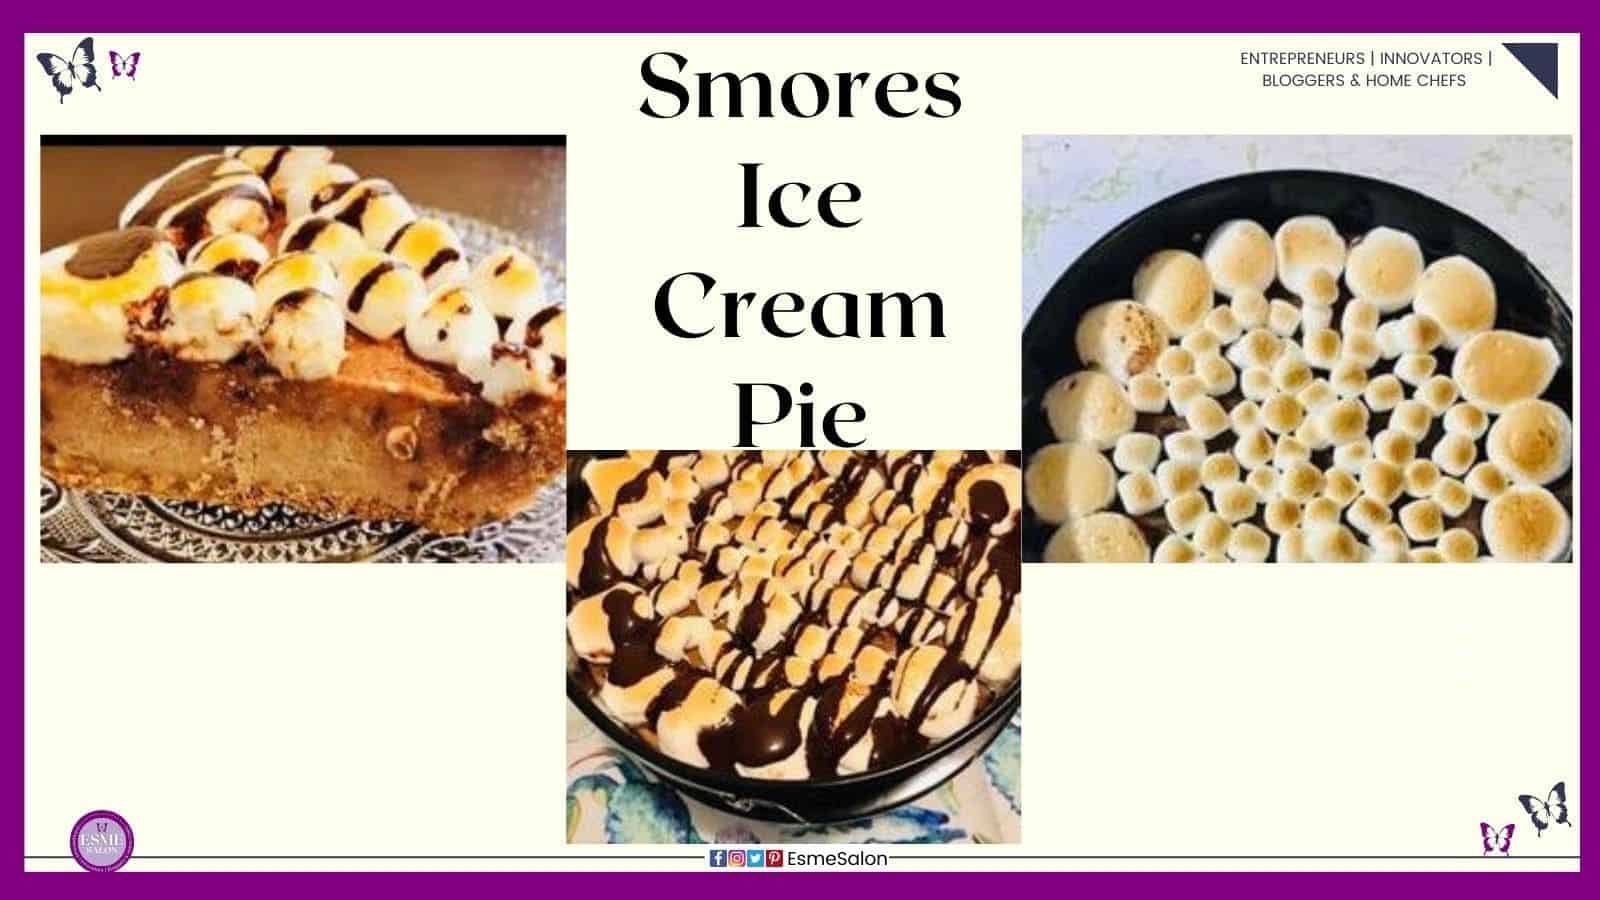 an image of a springform pan with a Smores Ice Cream Pie drizzled with chocolate